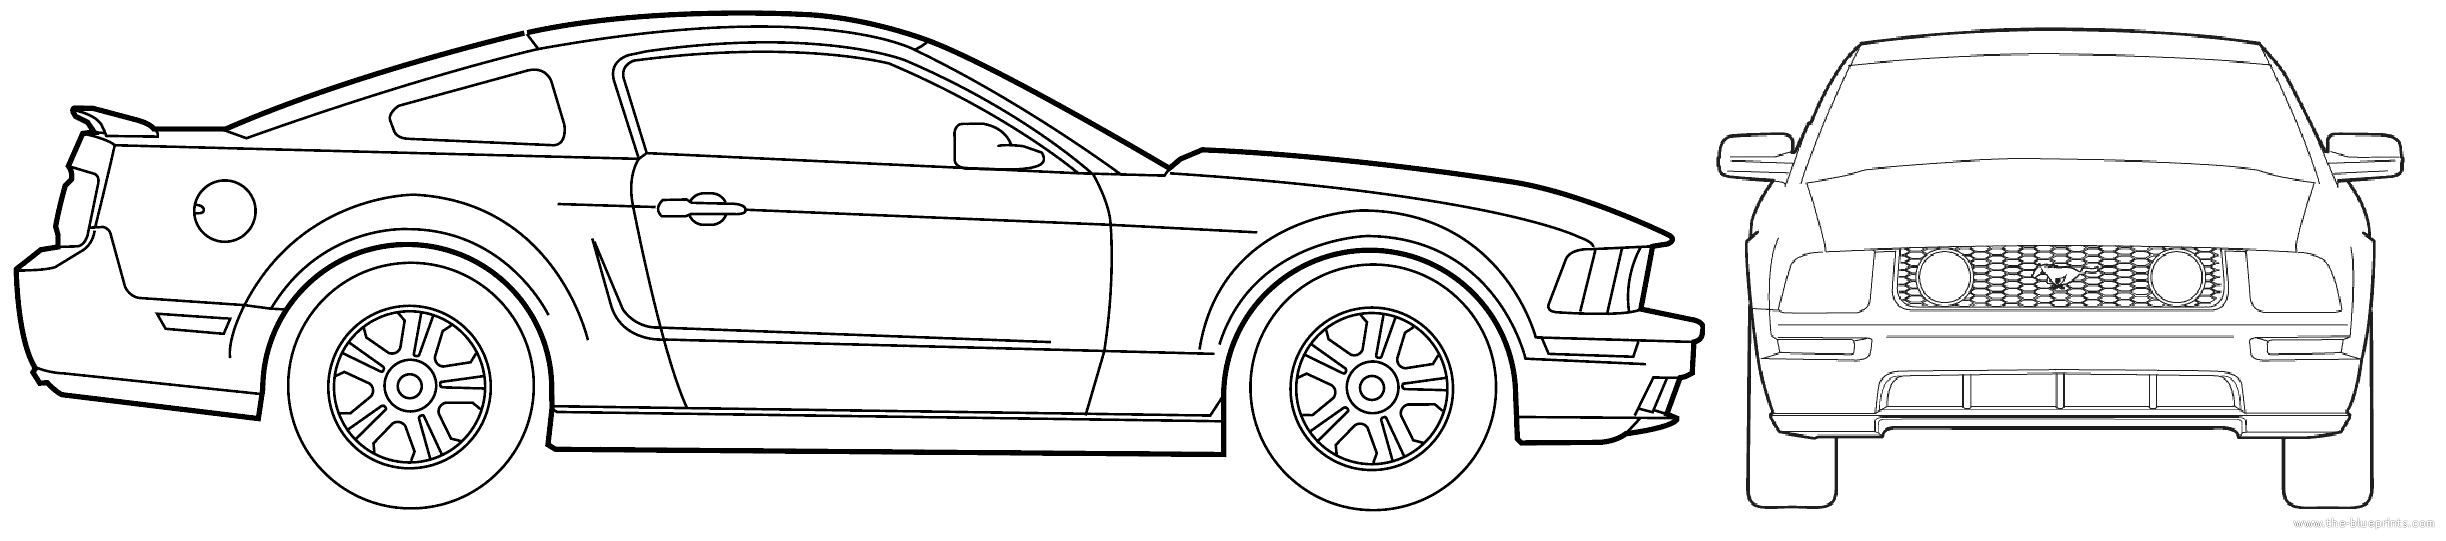 2005 Ford mustang blueprints #2